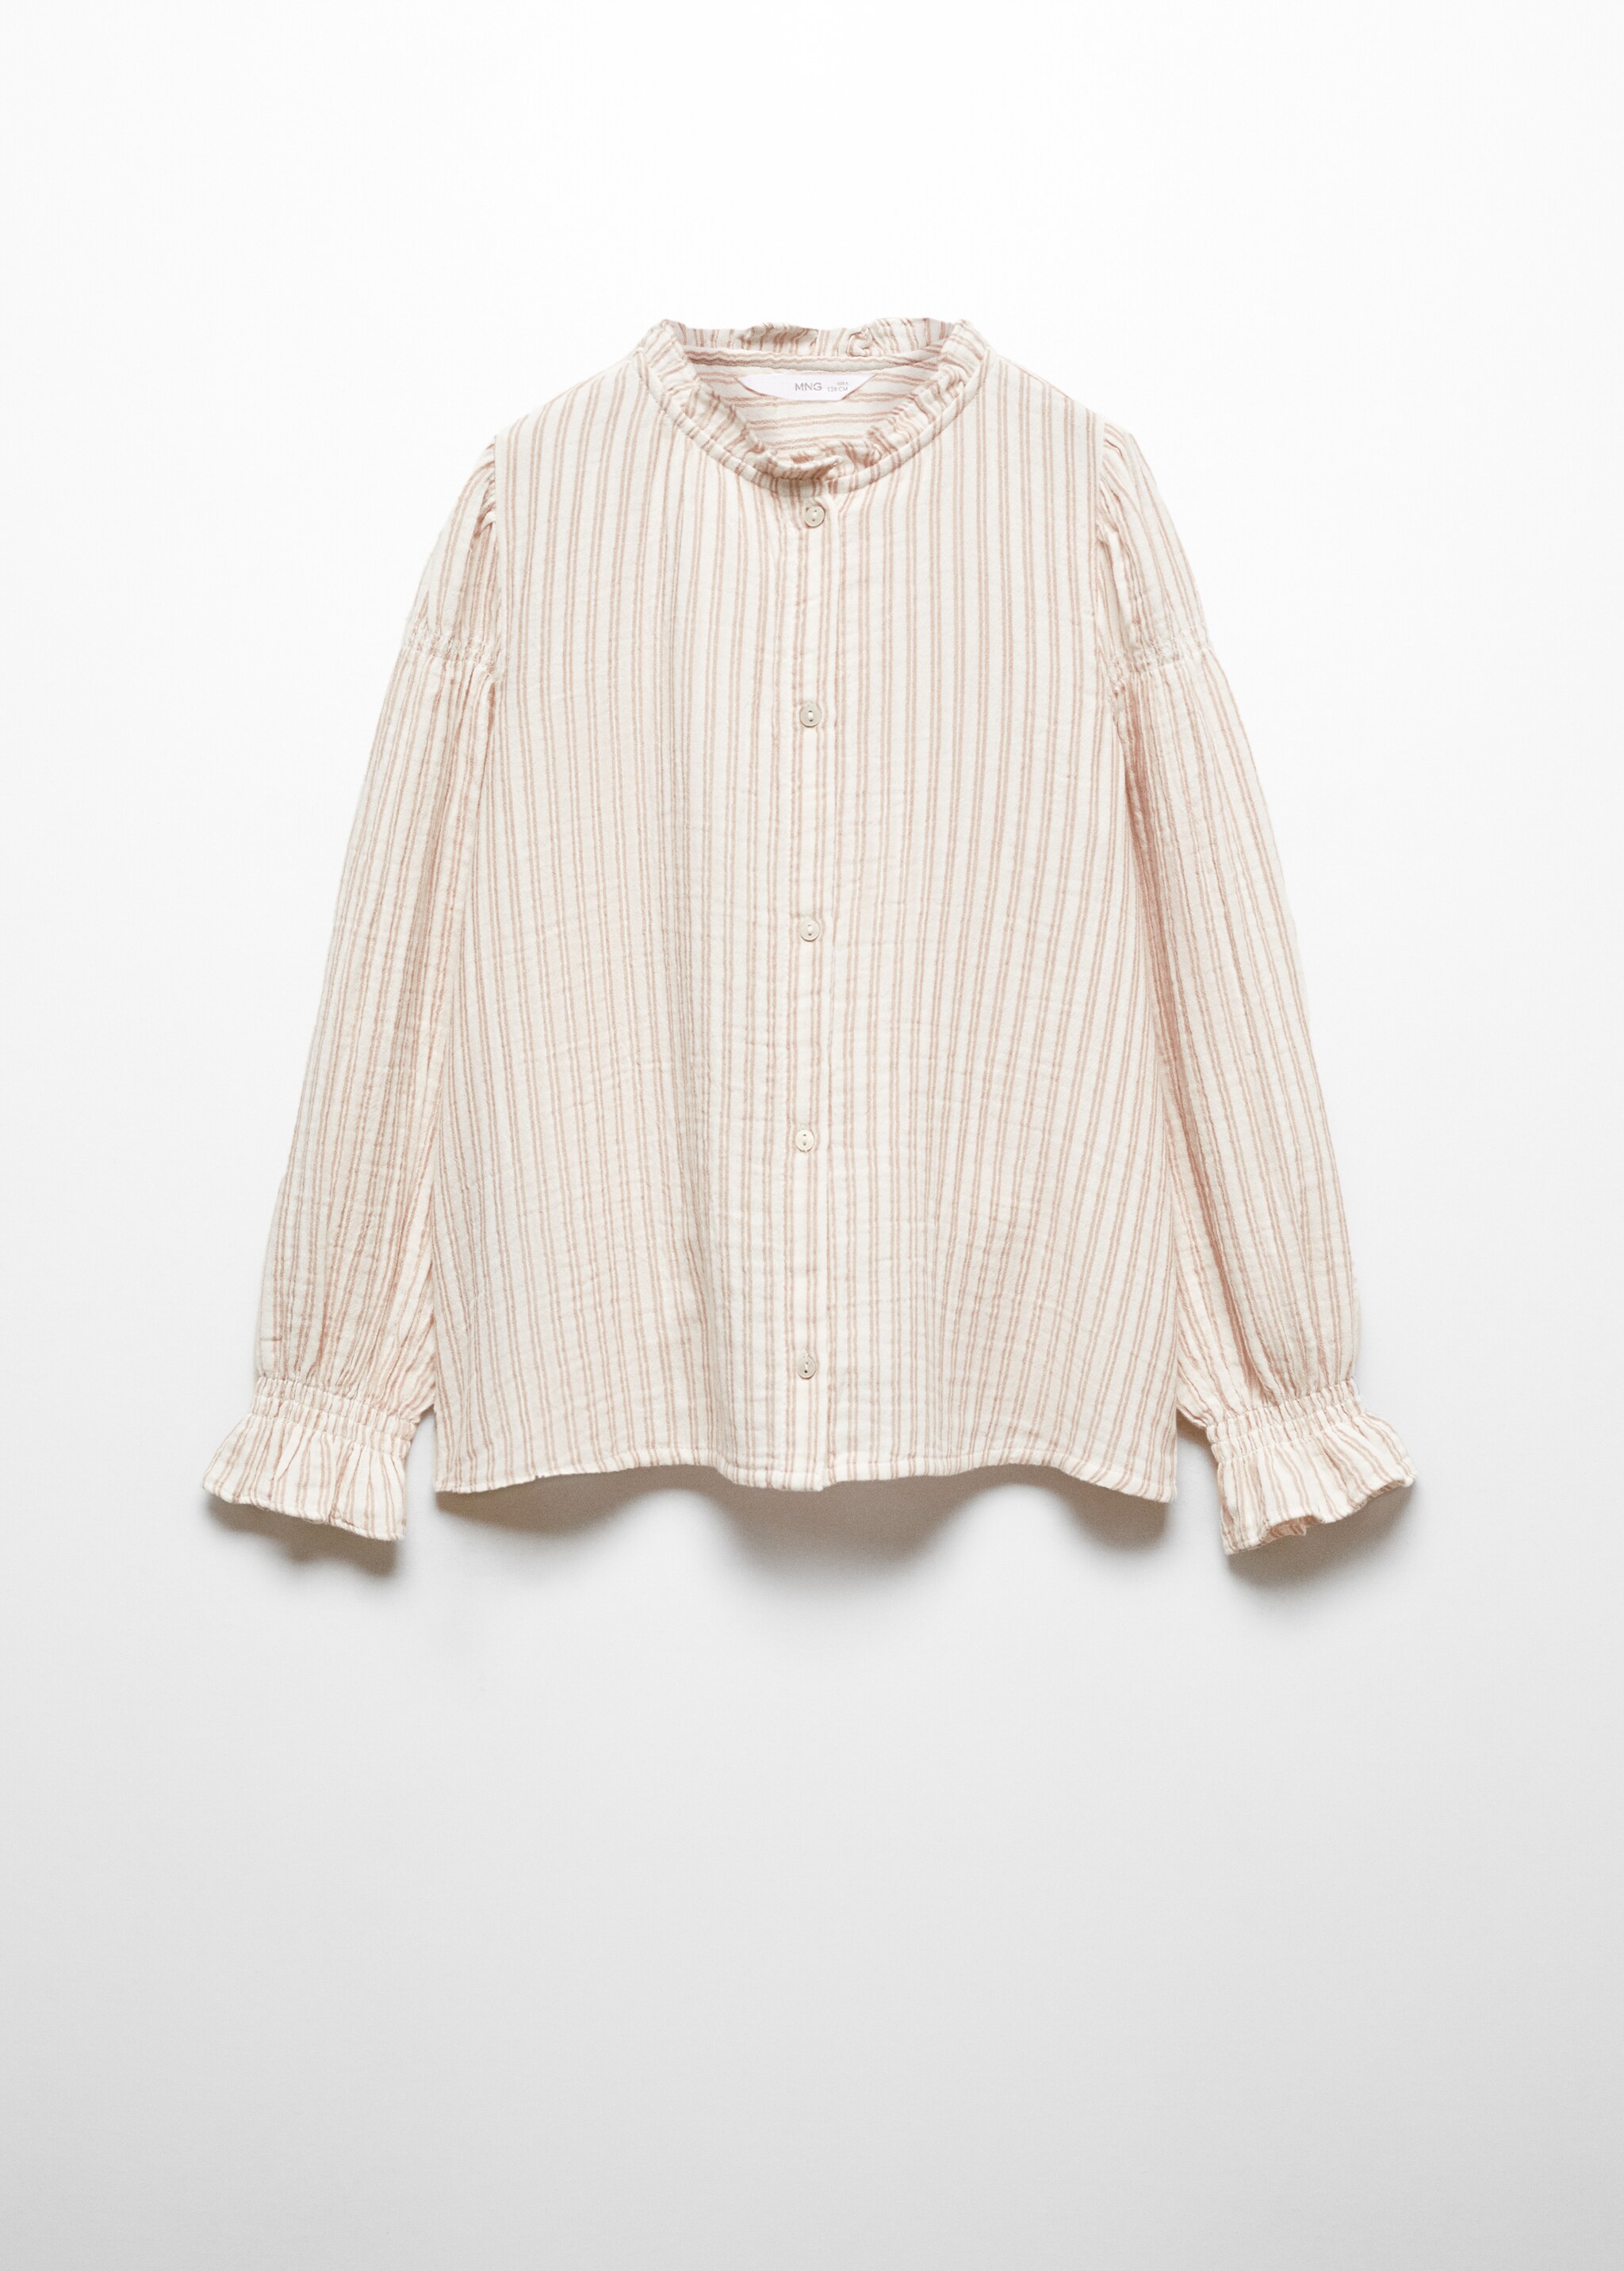 Striped cotton shirt - Article without model